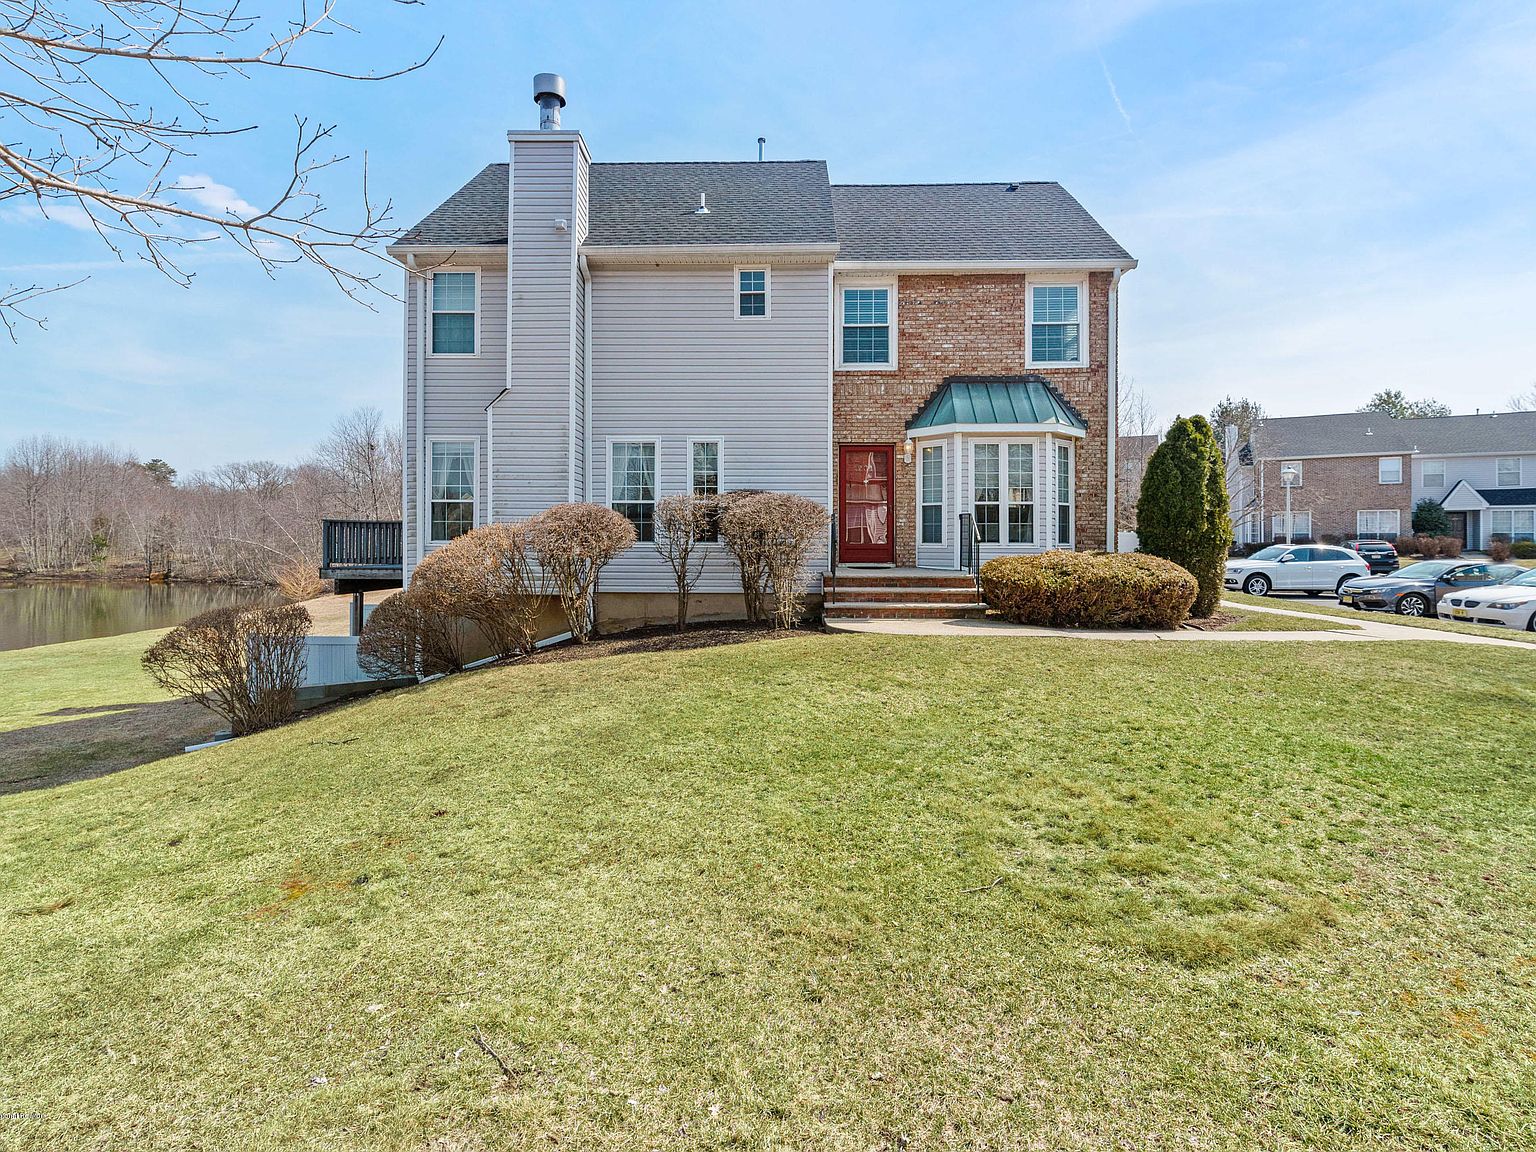 231 Colby Pl Morganville Nj 07751 Zillow